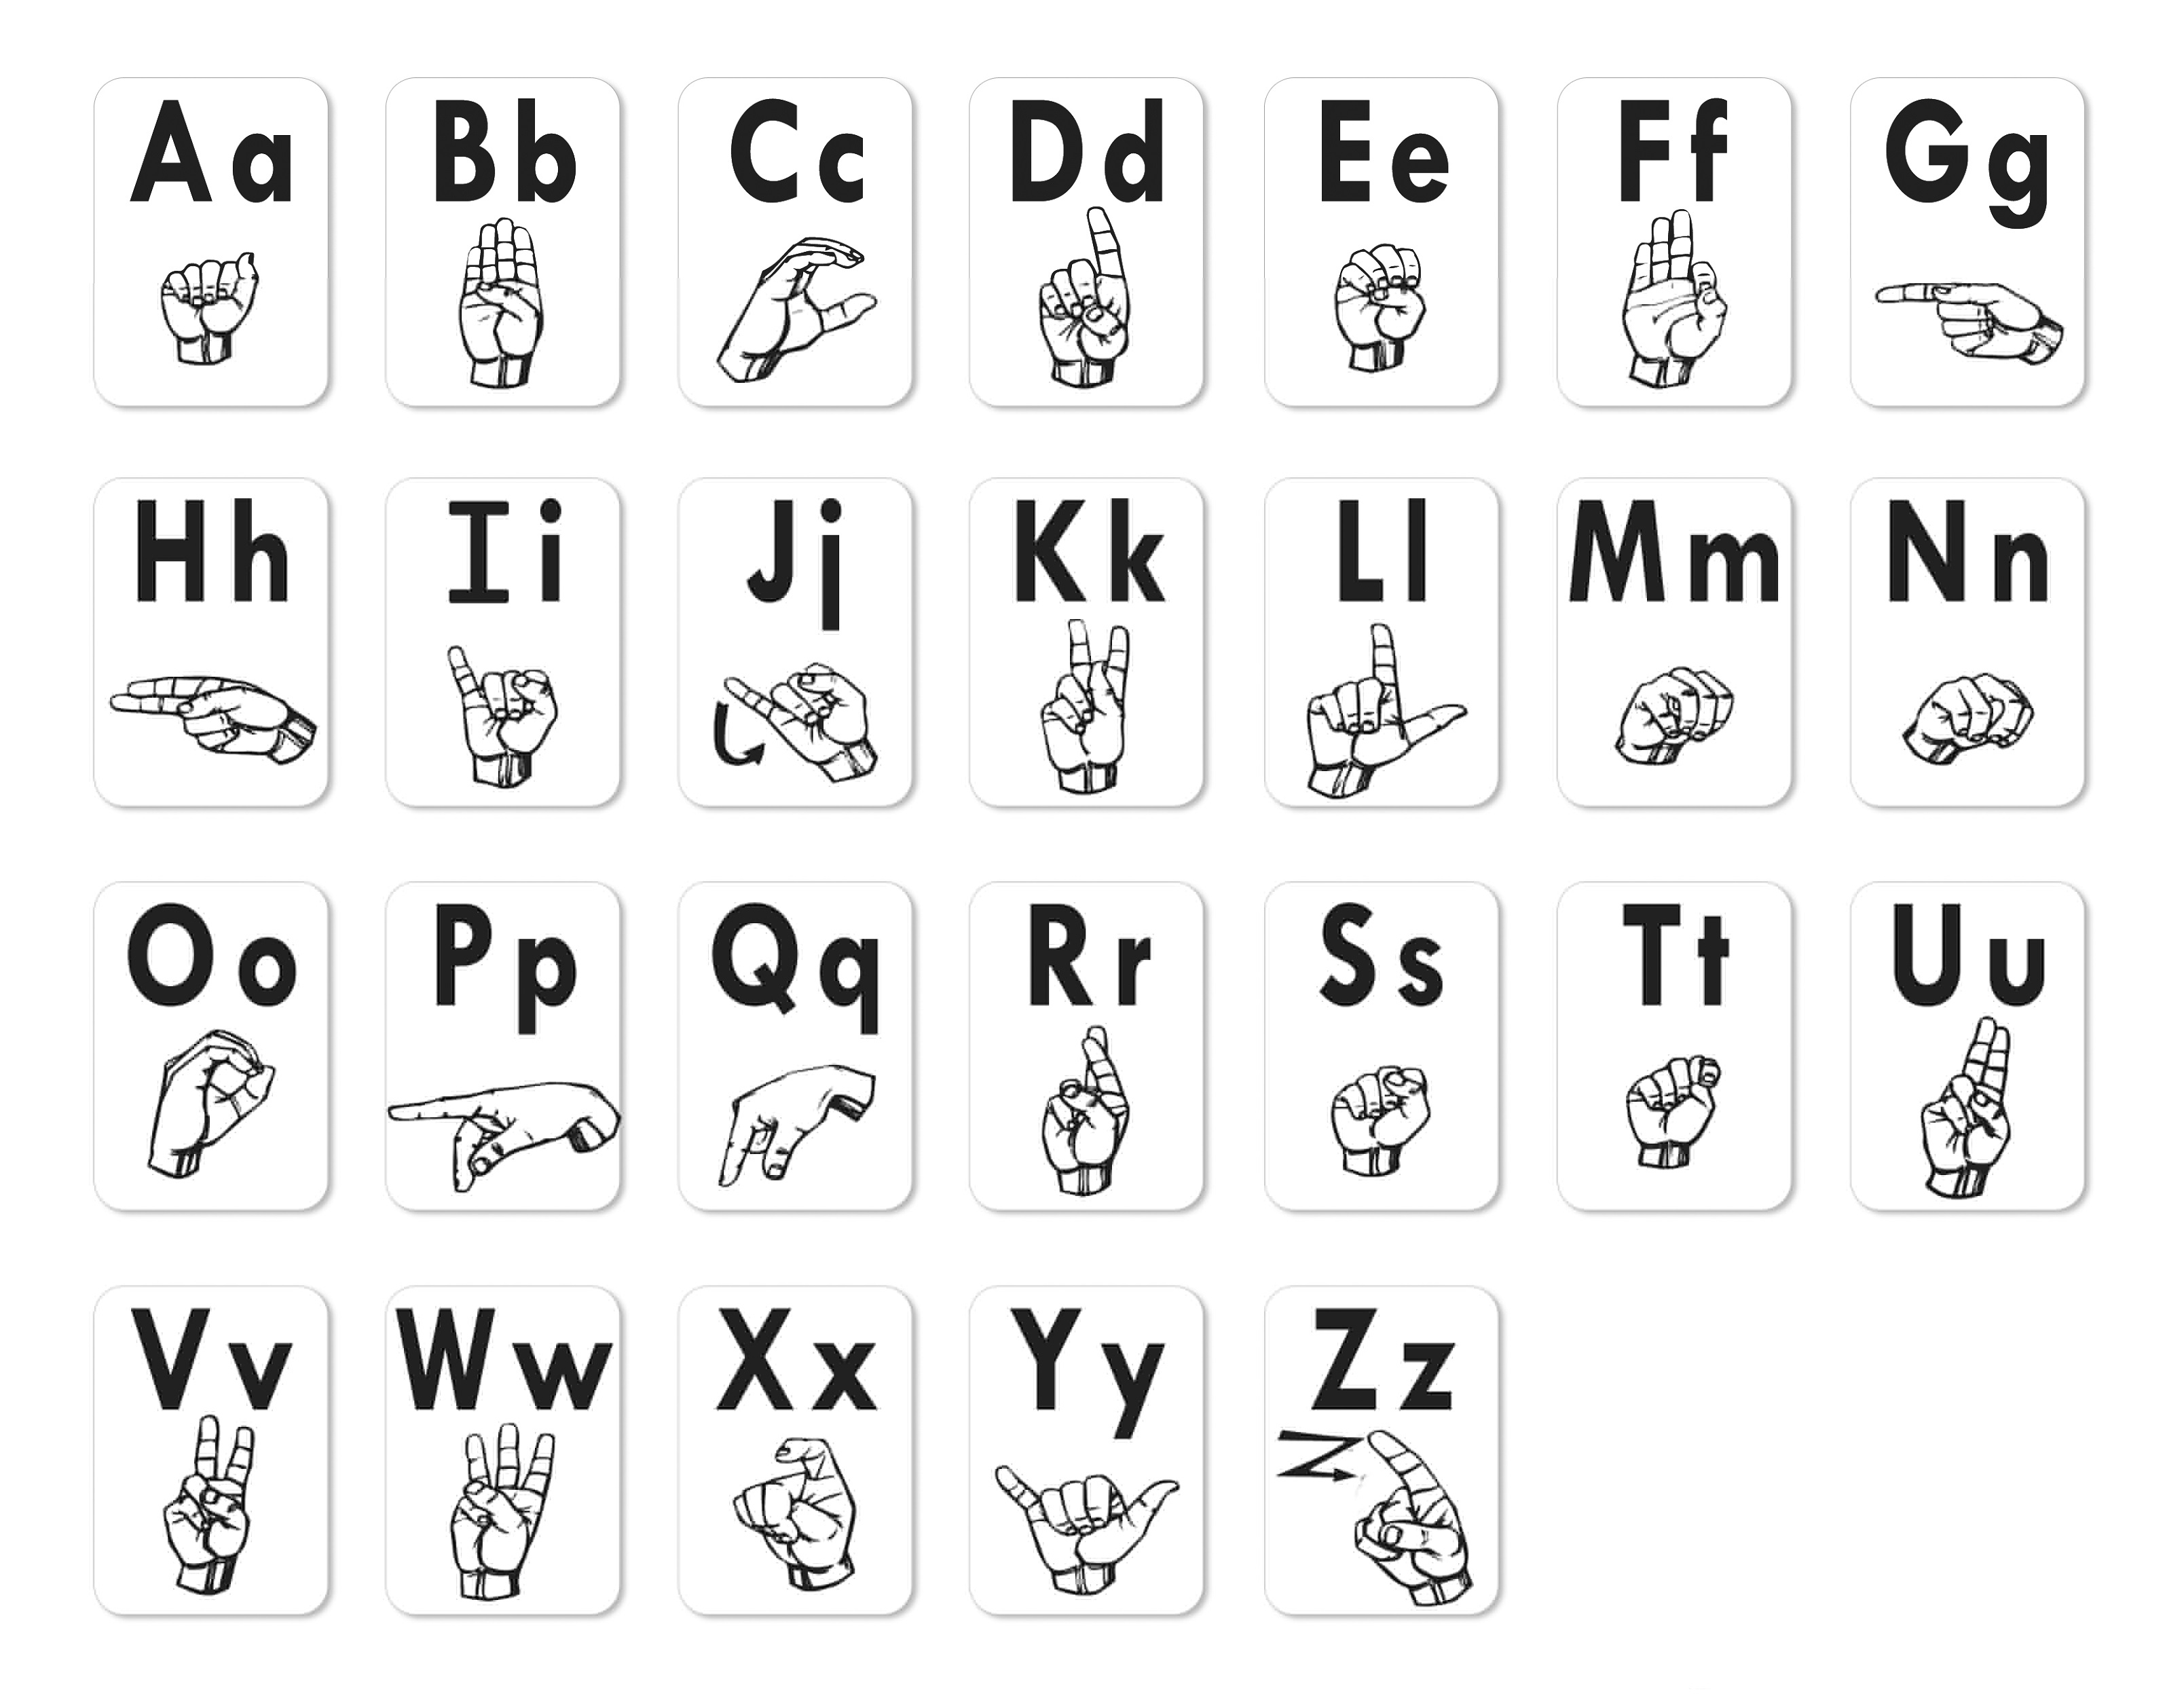 printable-sign-language-charts-activity-shelter-braille-alphabet-pattern-oppidan-library